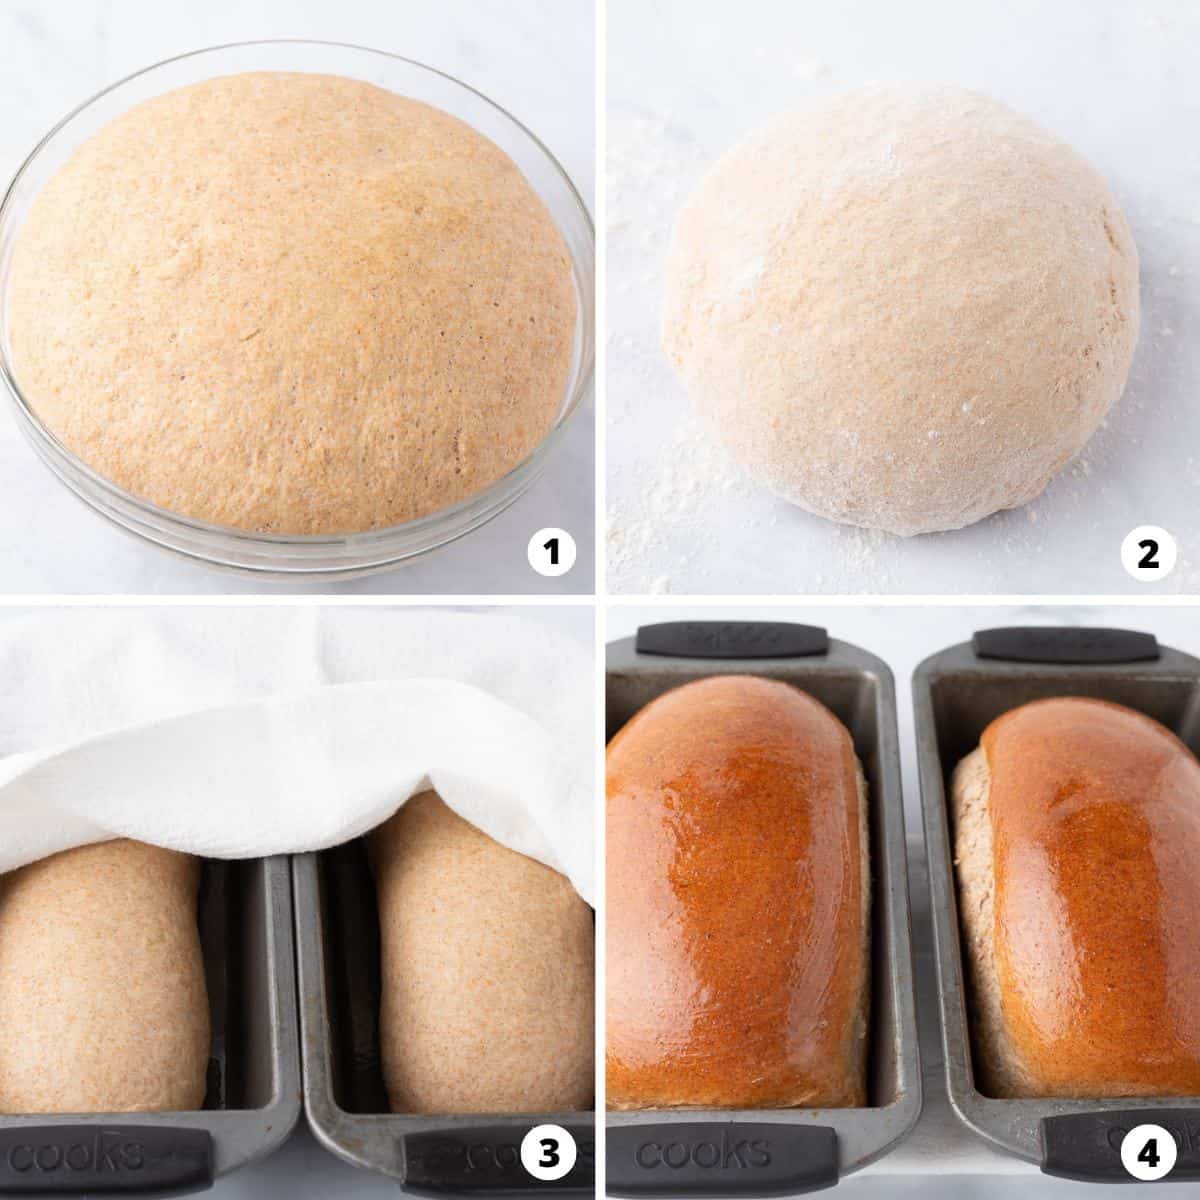 Showing how to make homemade wheat bread in a 4 step collage.